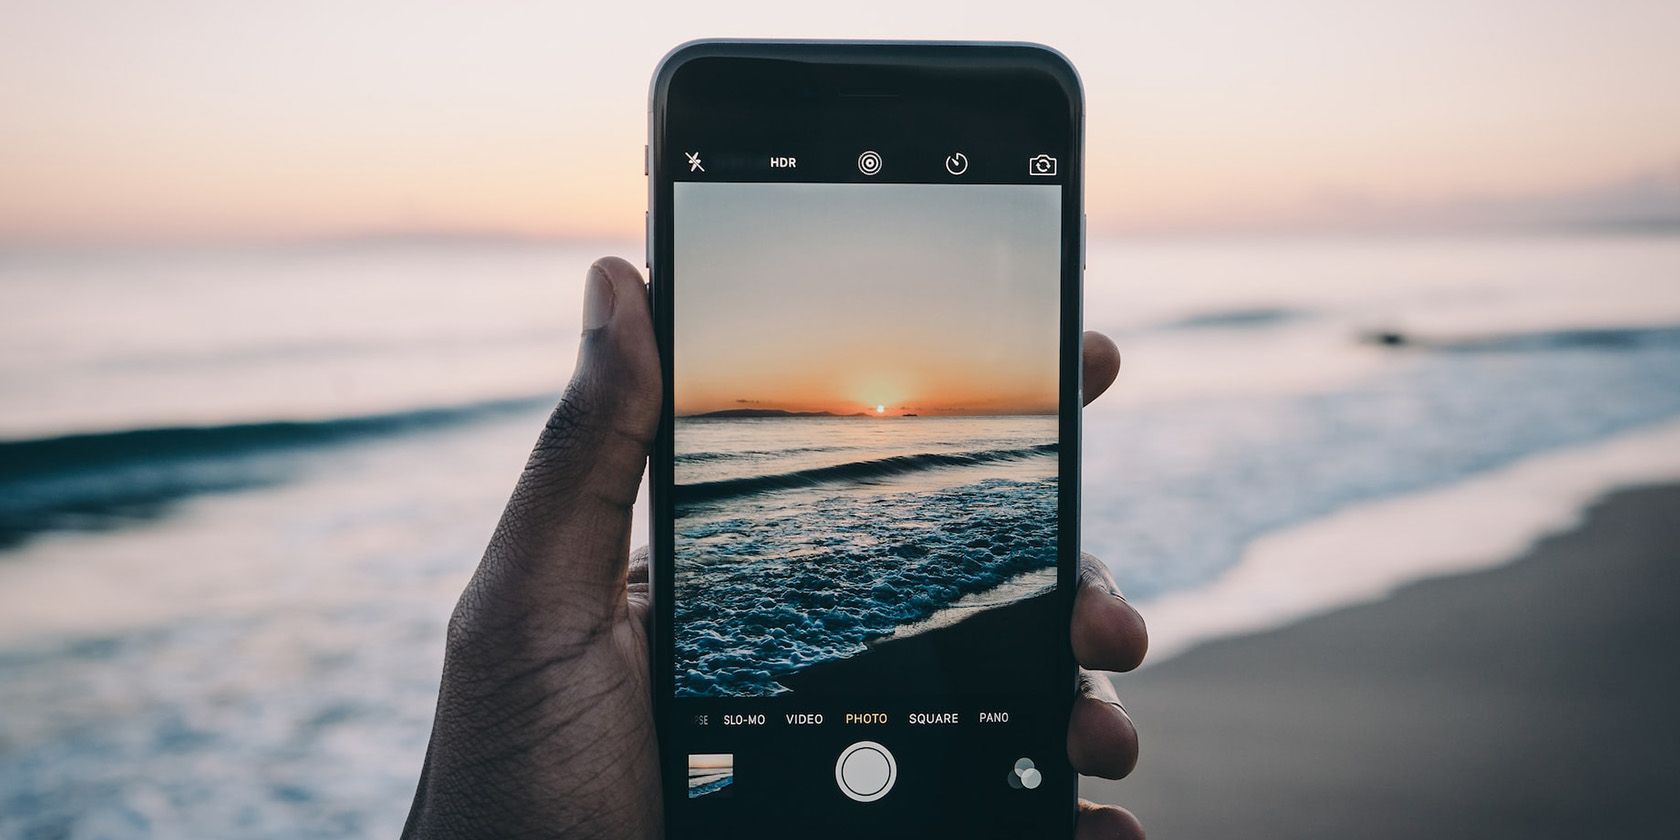 A hand taking holding an iPhone taking a picture of the ocean